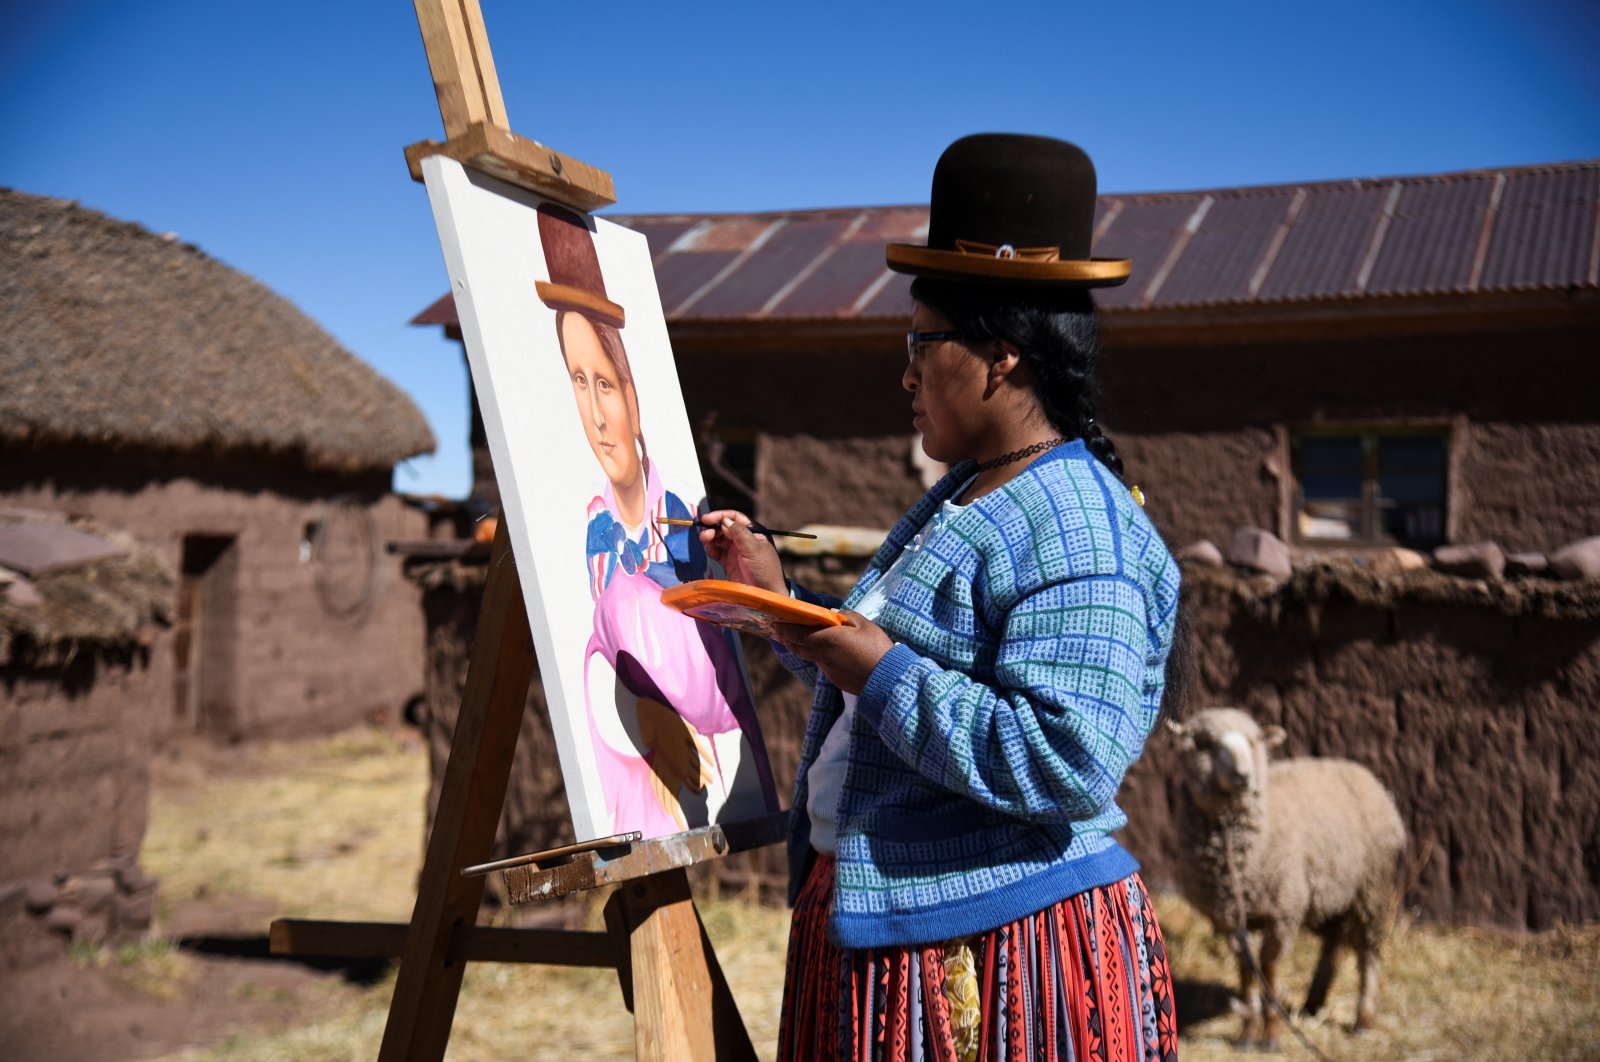 Claudia Callizaya, 32, a Bolivian painter known as Claudina, applies final touches to her work, cholita-style Mona Lisa painting, at her house in Kalla Baja, Bolivia, May 29, 2022. (Reuters Photo)